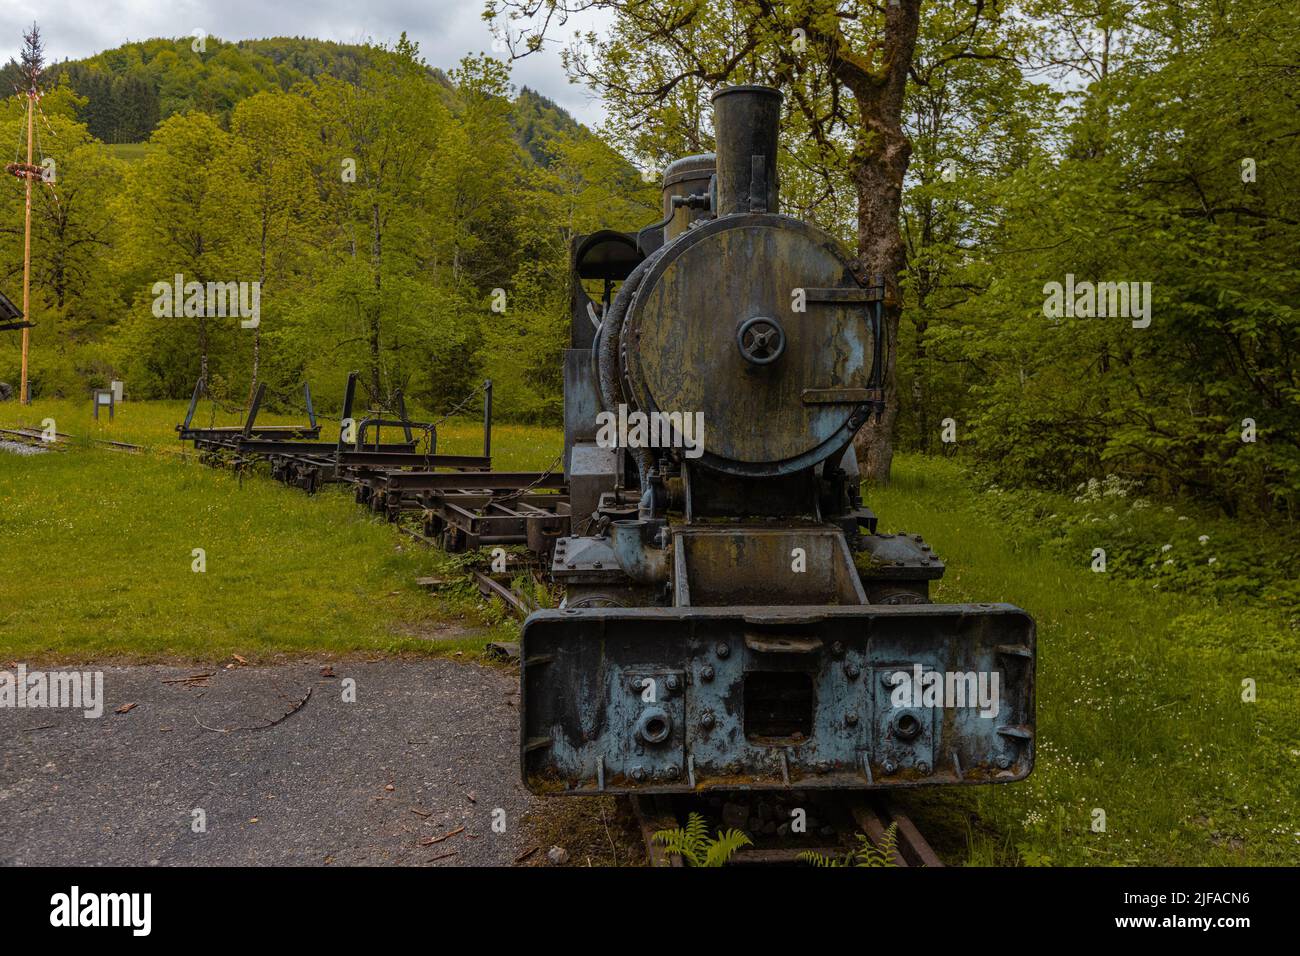 Waldbahn Reichraming, old museum narrow gauge railway close to Reichraming, Austria. View of the steam engine and a row of wagons behind. Stock Photo